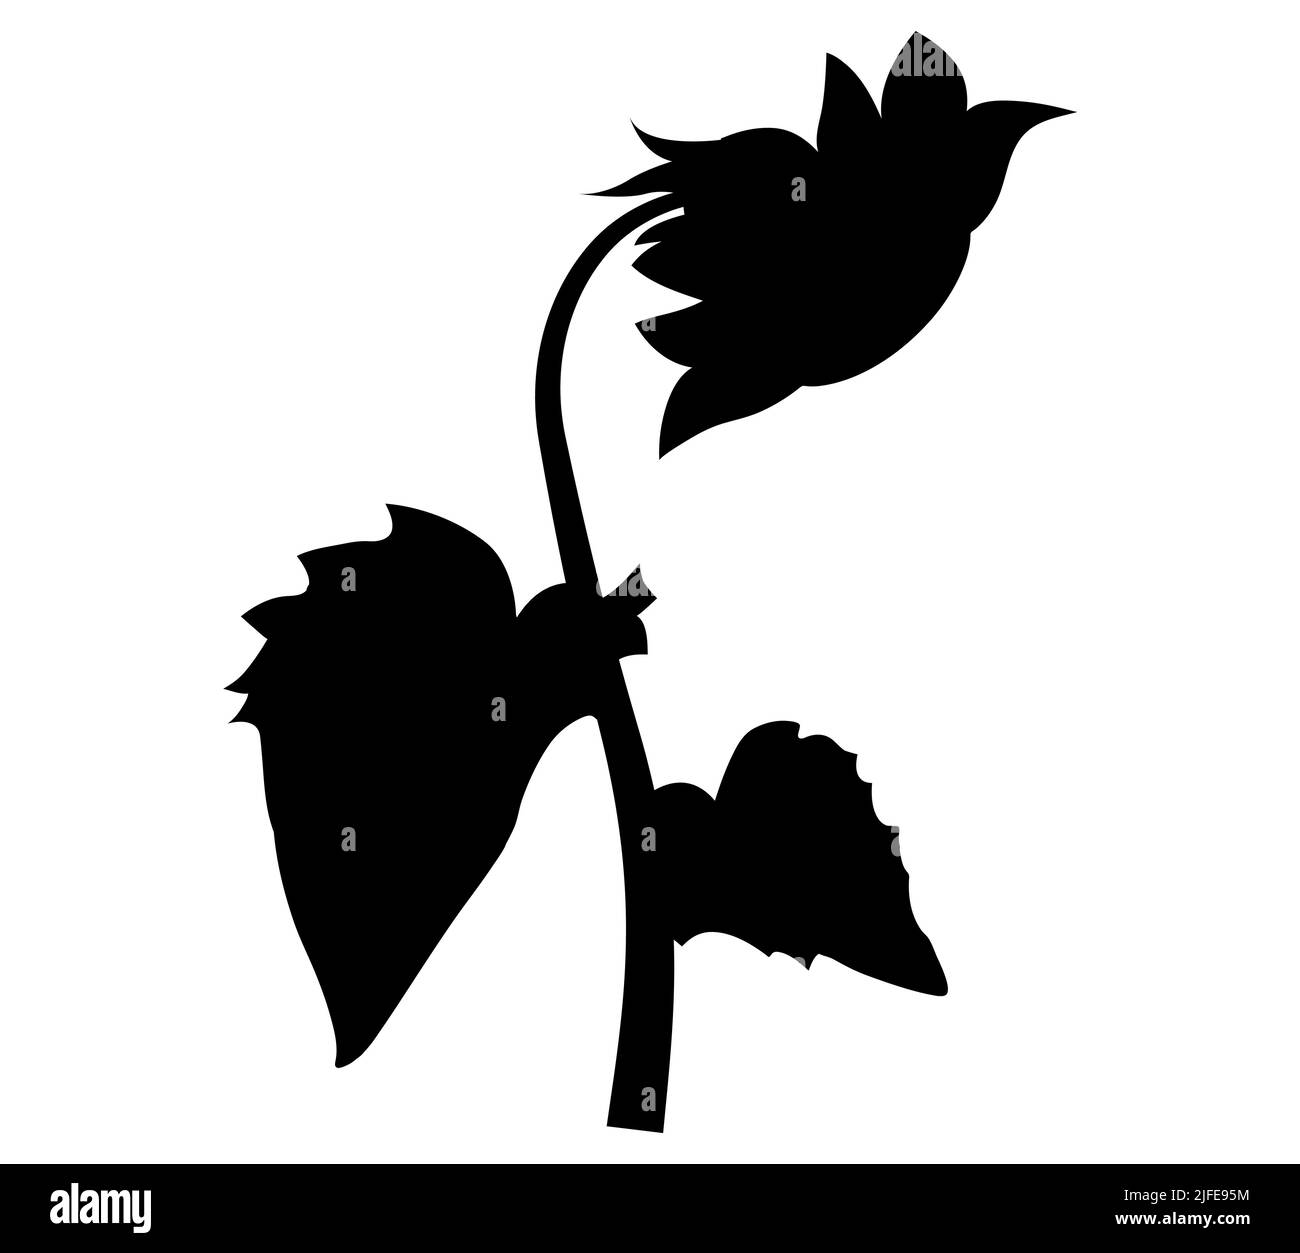 Isolated vector illustration. Sunflower plant. Black and white silhouette. Stock Vector